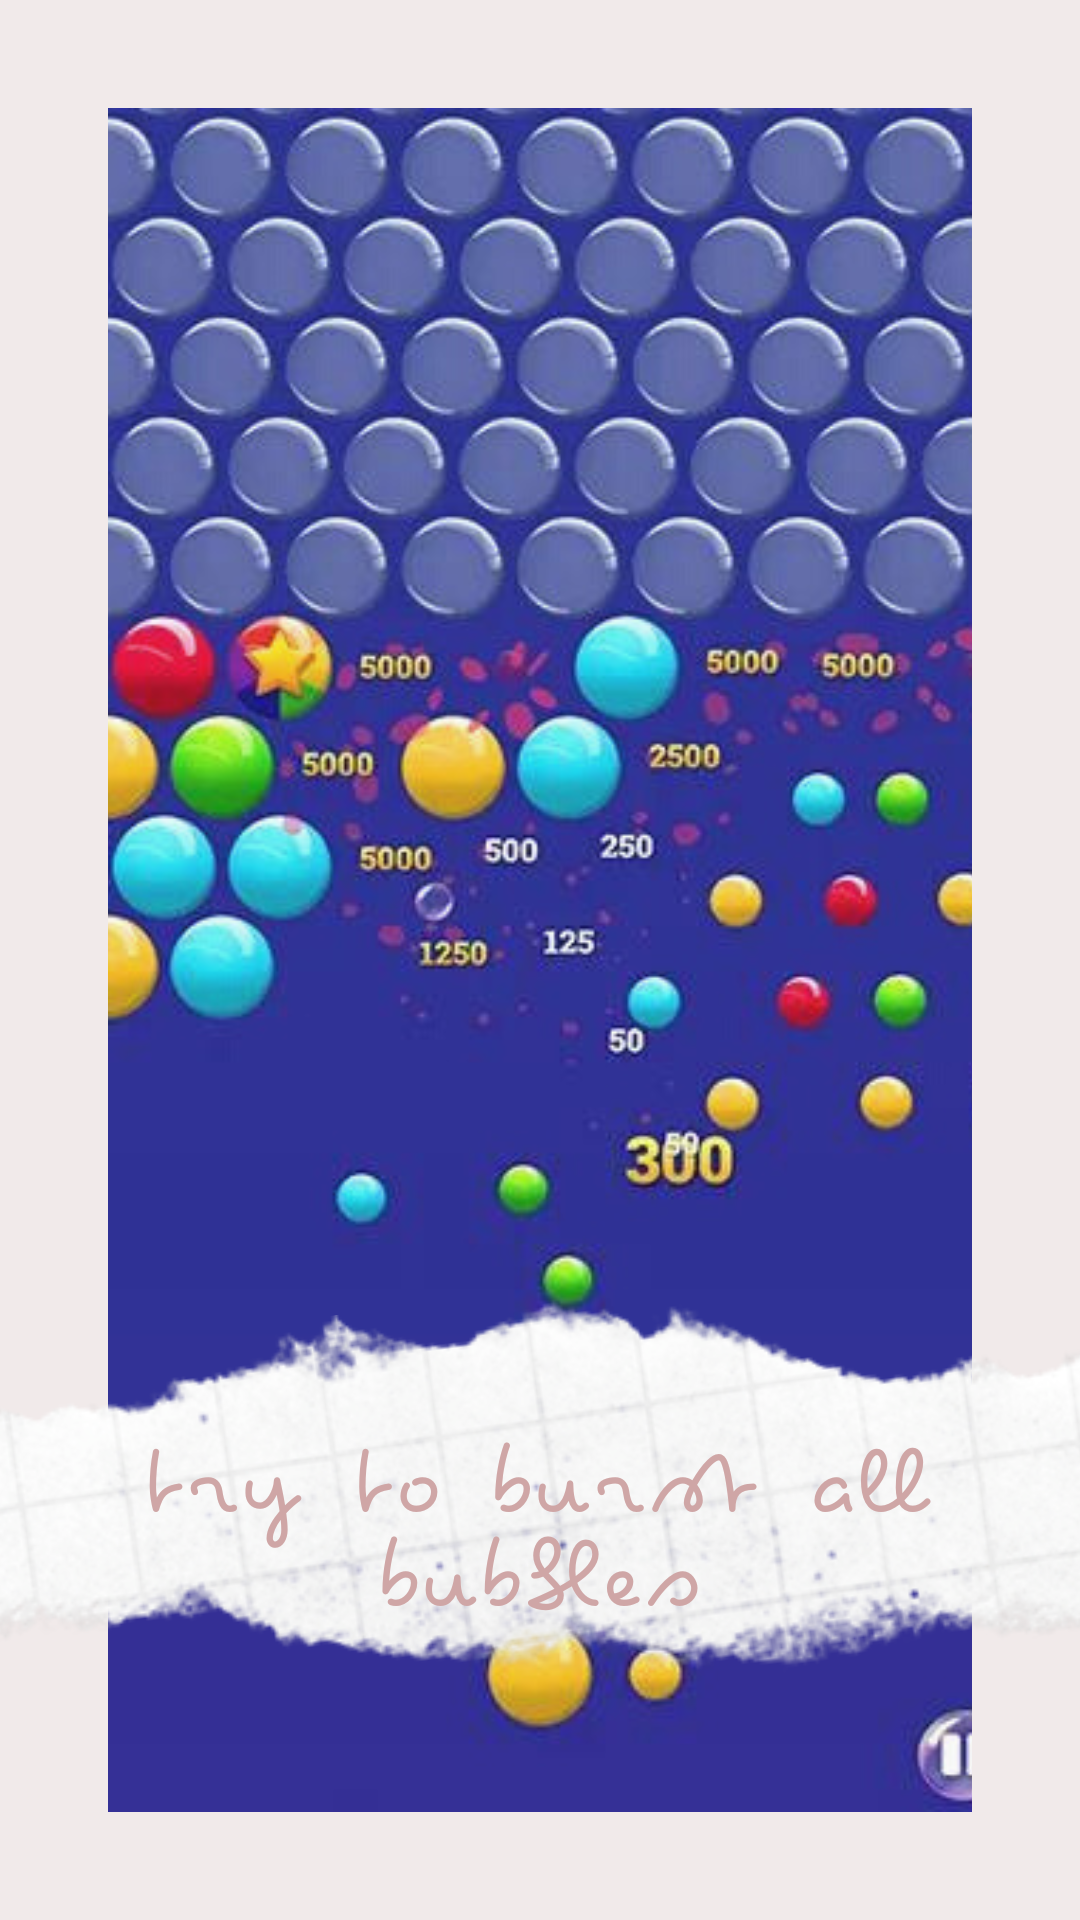 Smarty Bubbles::Appstore for Android